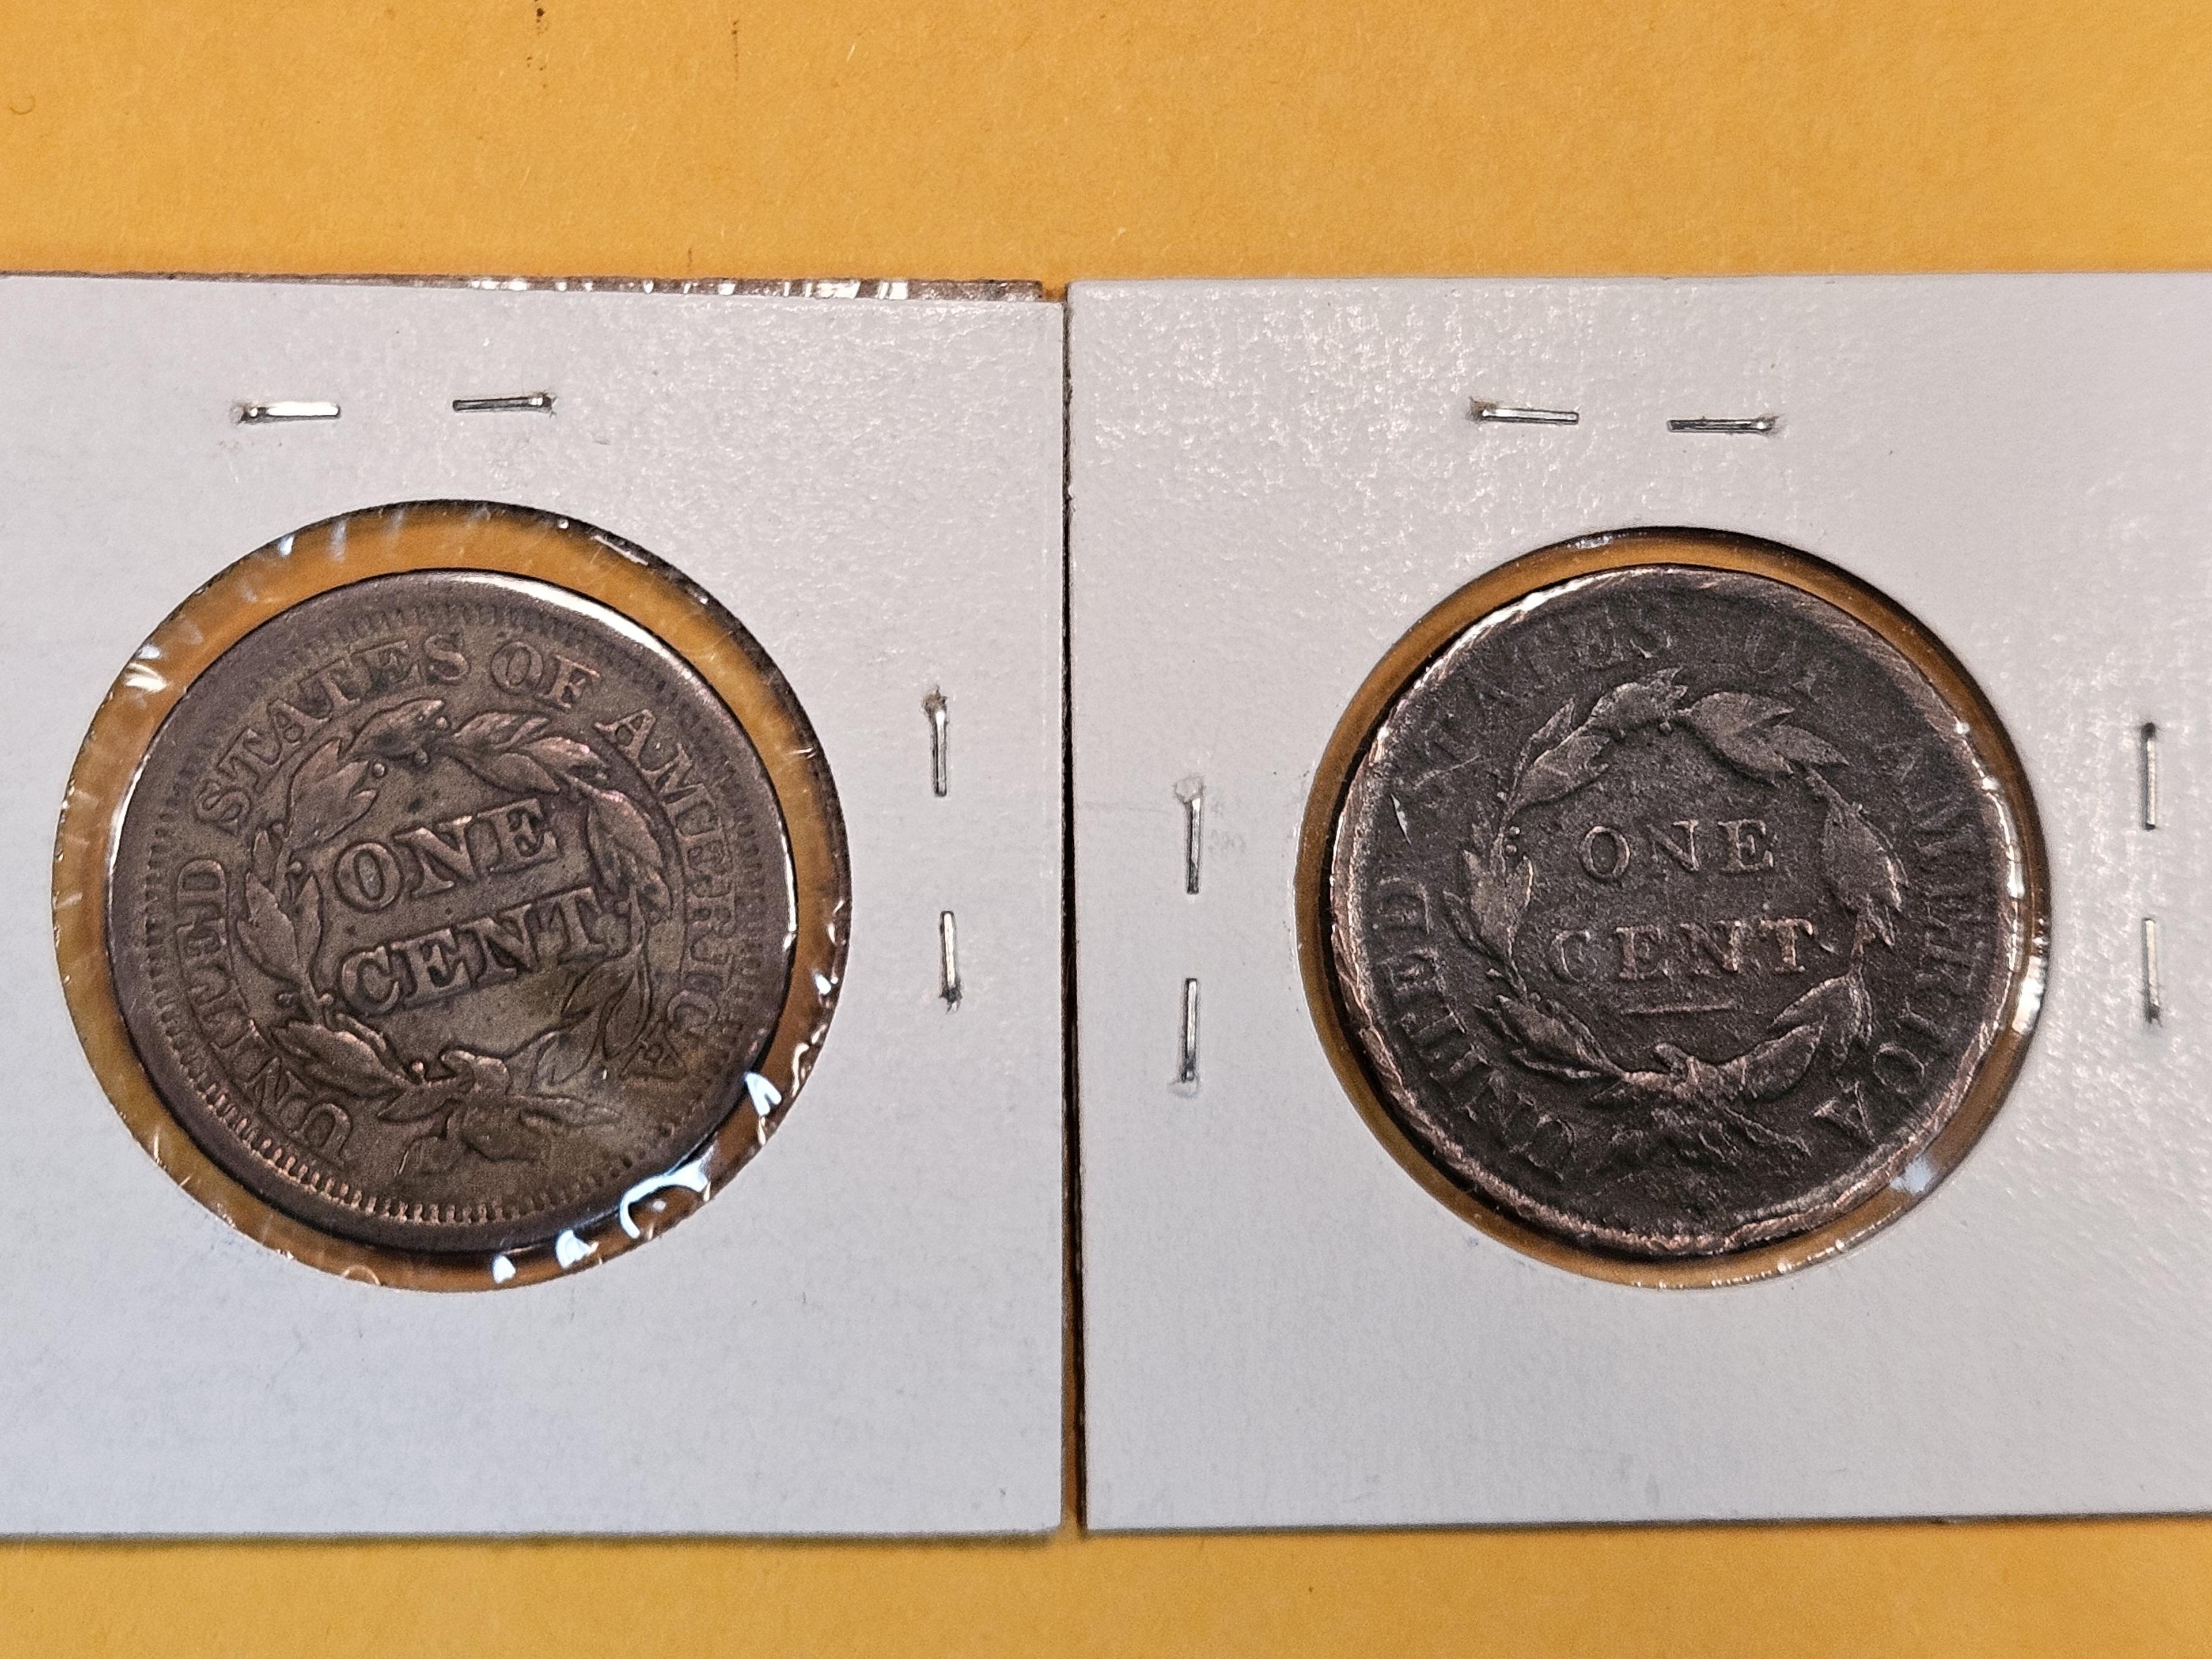 1853 and 1817 Large Cents